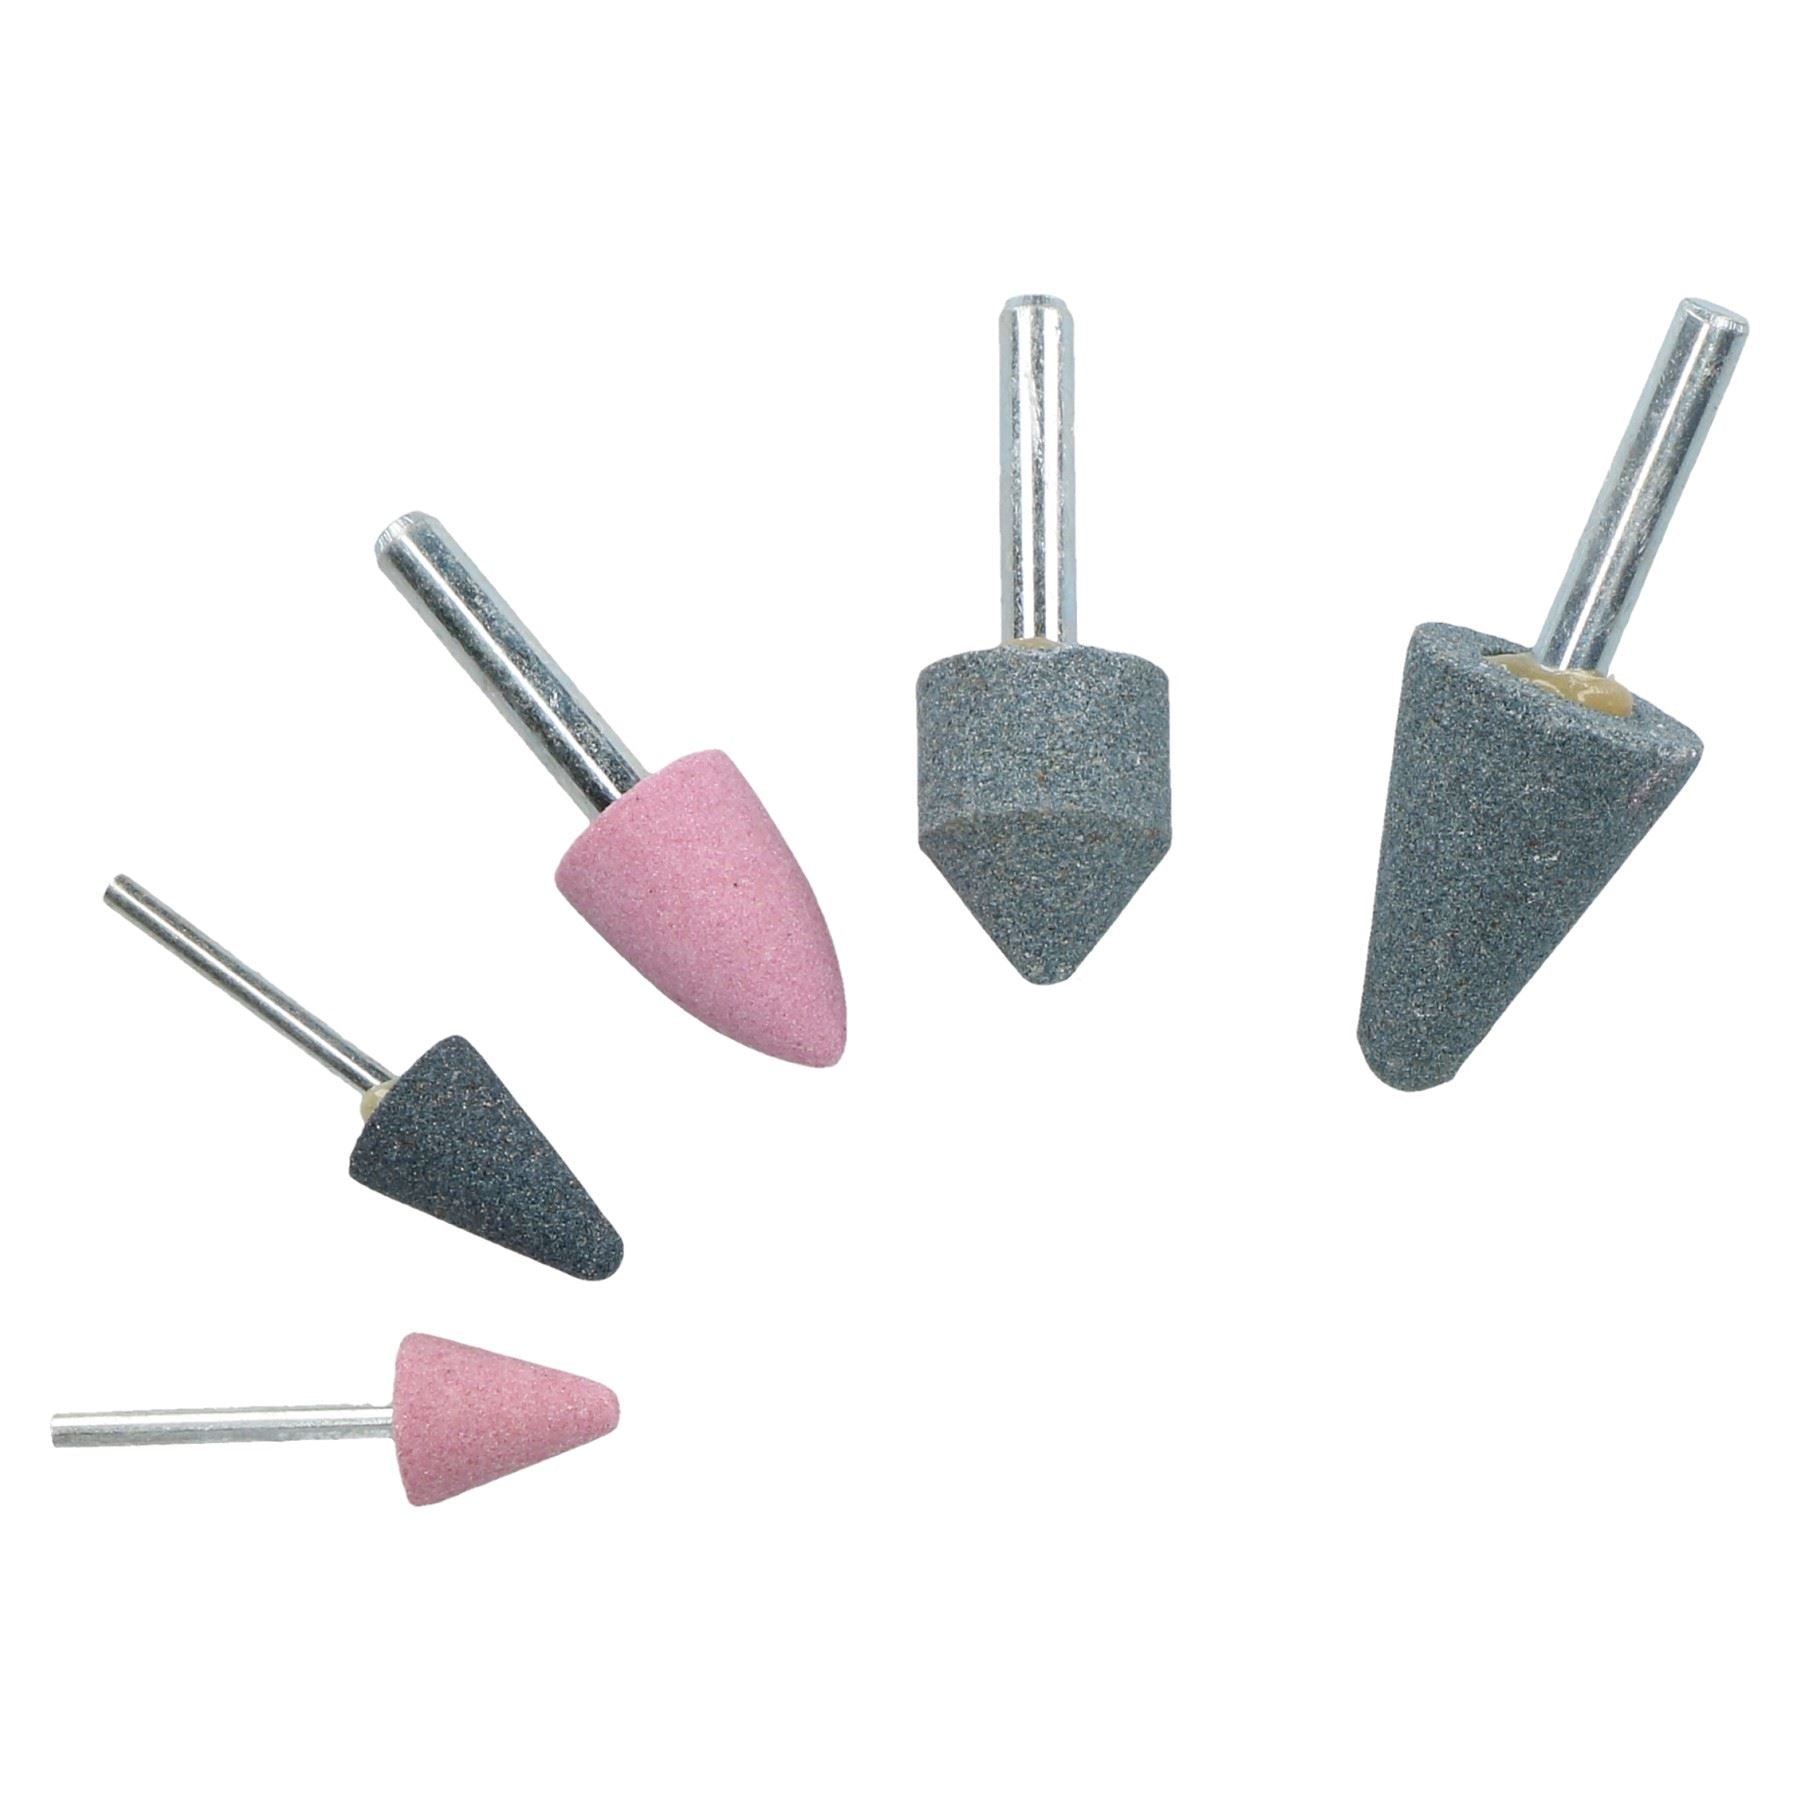 10pc Assorted Abrasive Polishing Grinding Sanding Stones 1/8 and 1/4 Collet